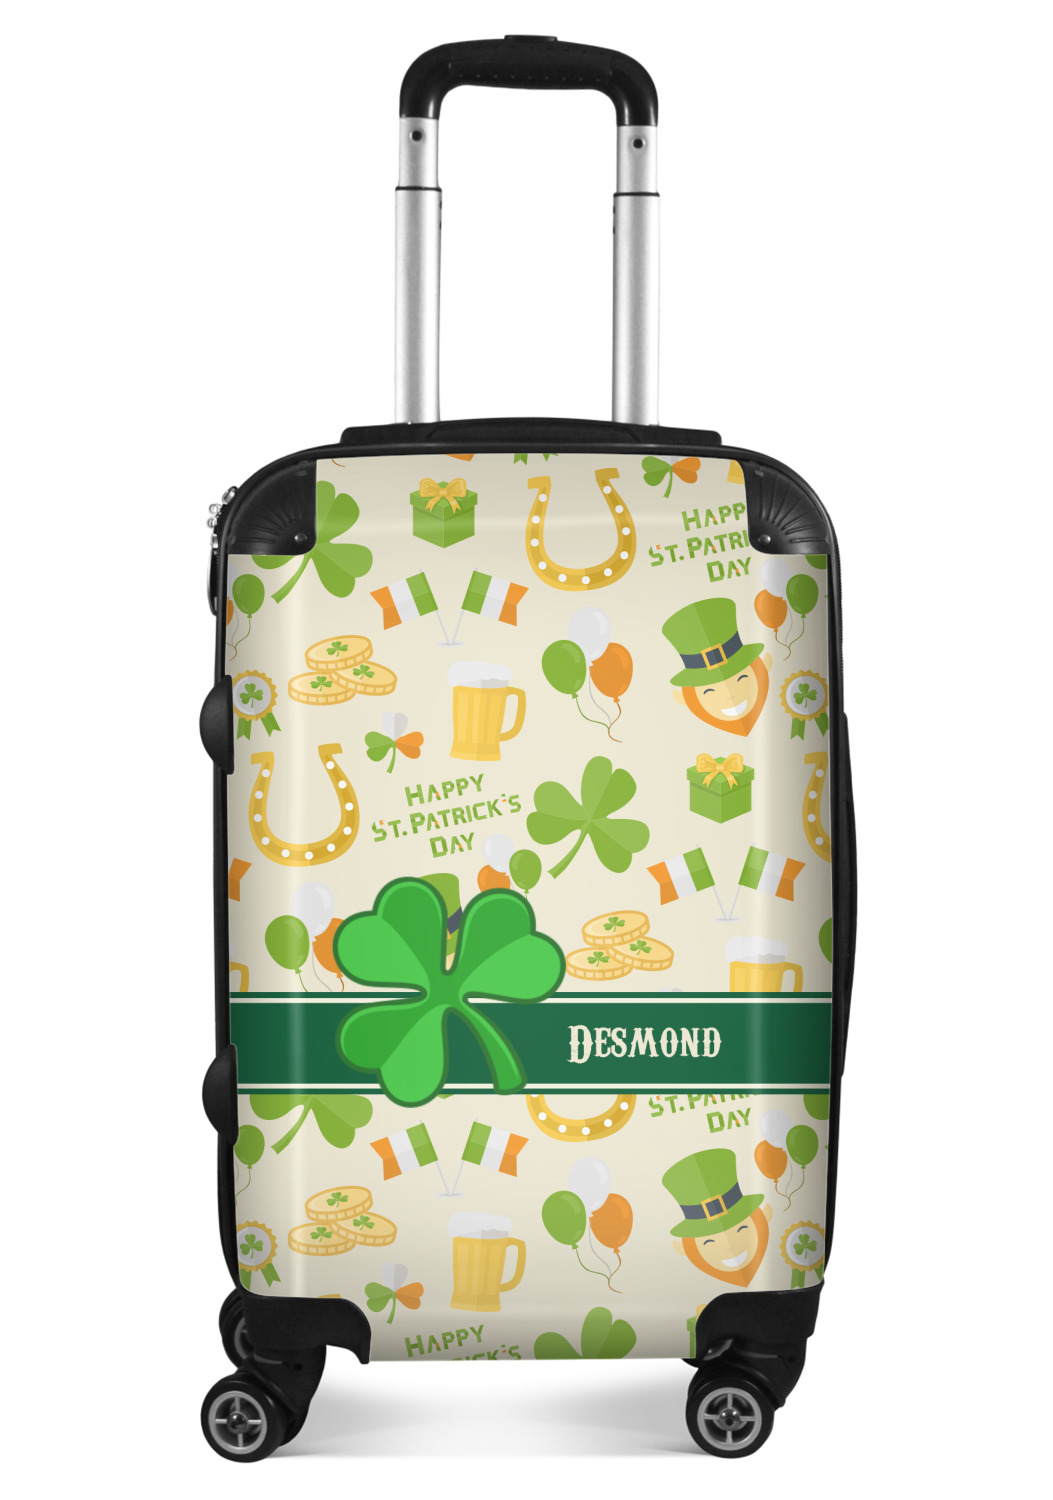 St. Patrick's Day Suitcase (Personalized) - YouCustomizeIt